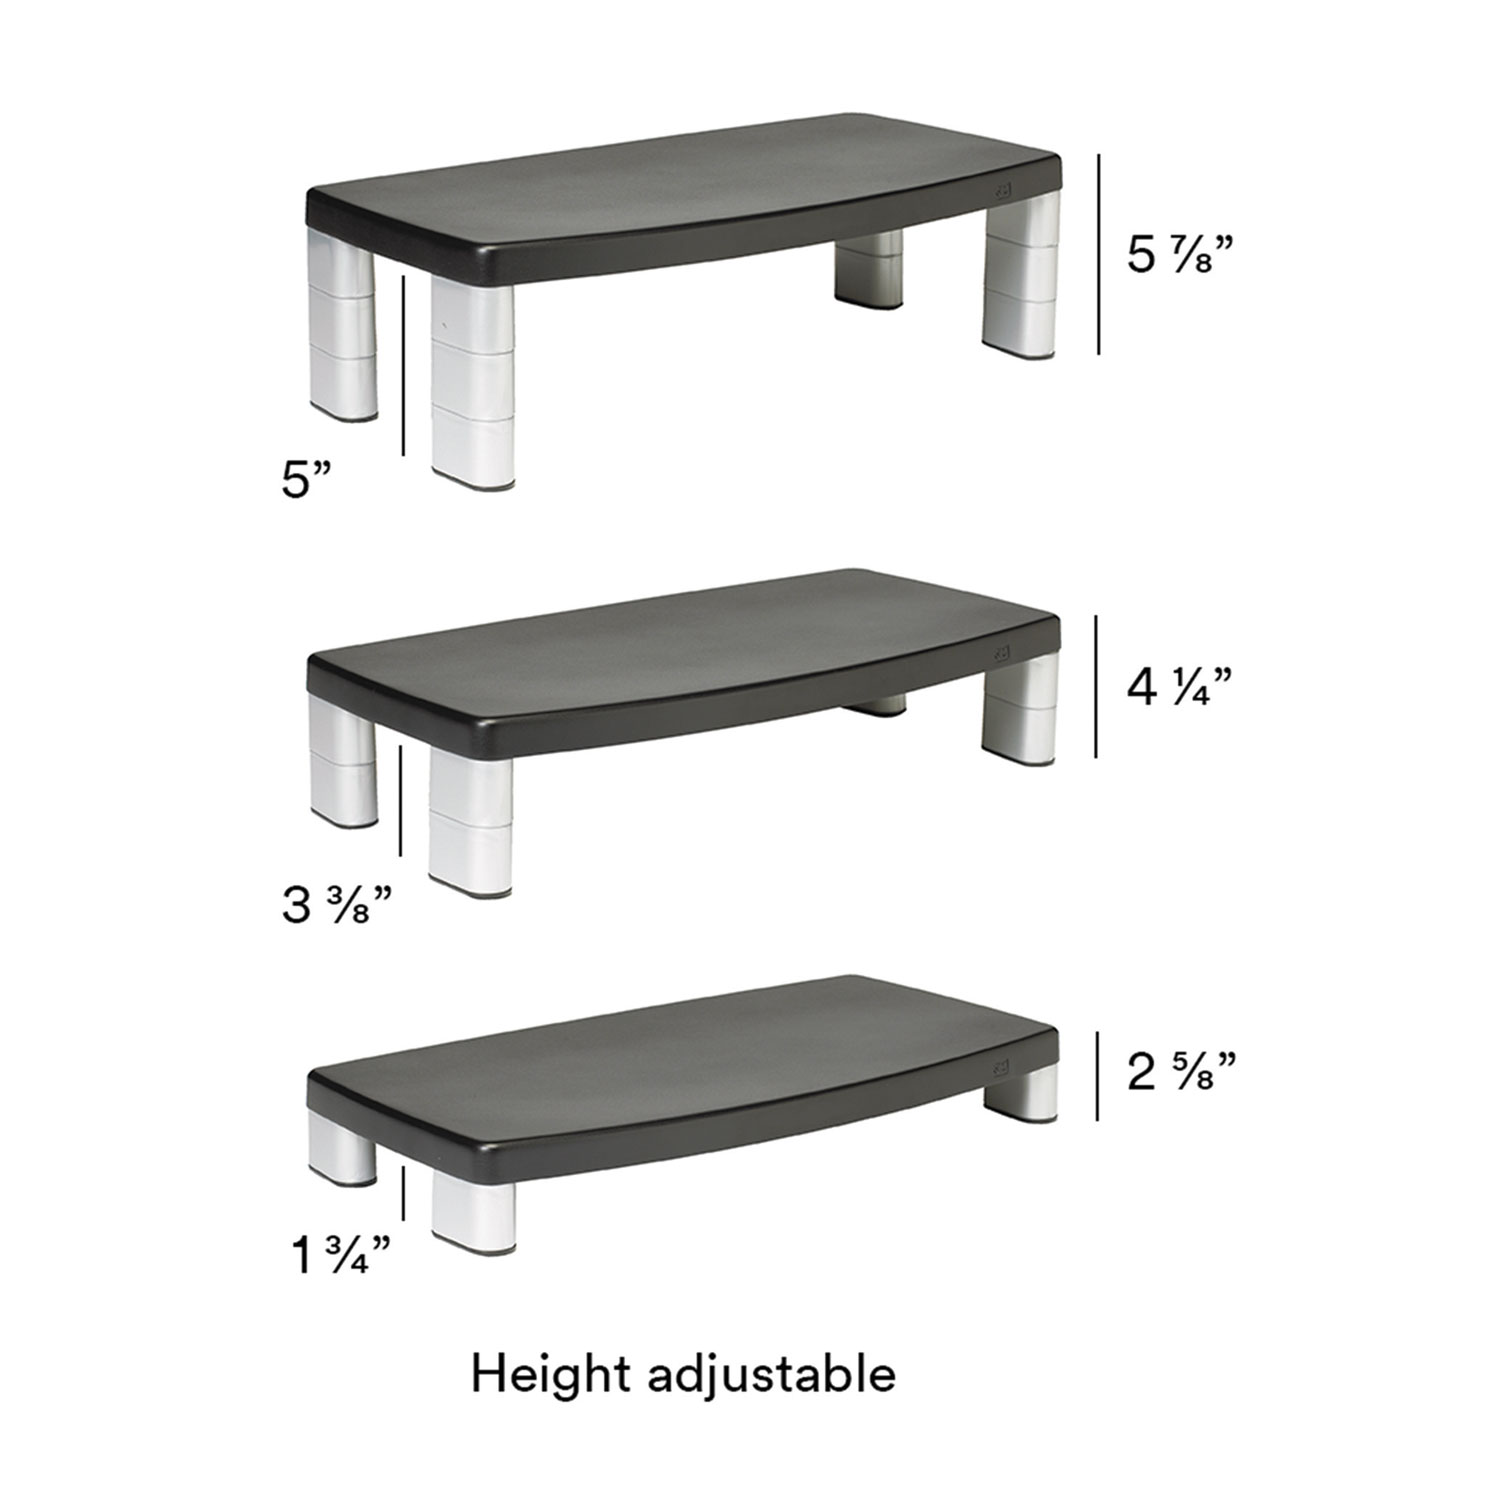 Extra-Wide Adjustable Monitor Stand, 20 x 12 x 1 to 5 7/8, Black